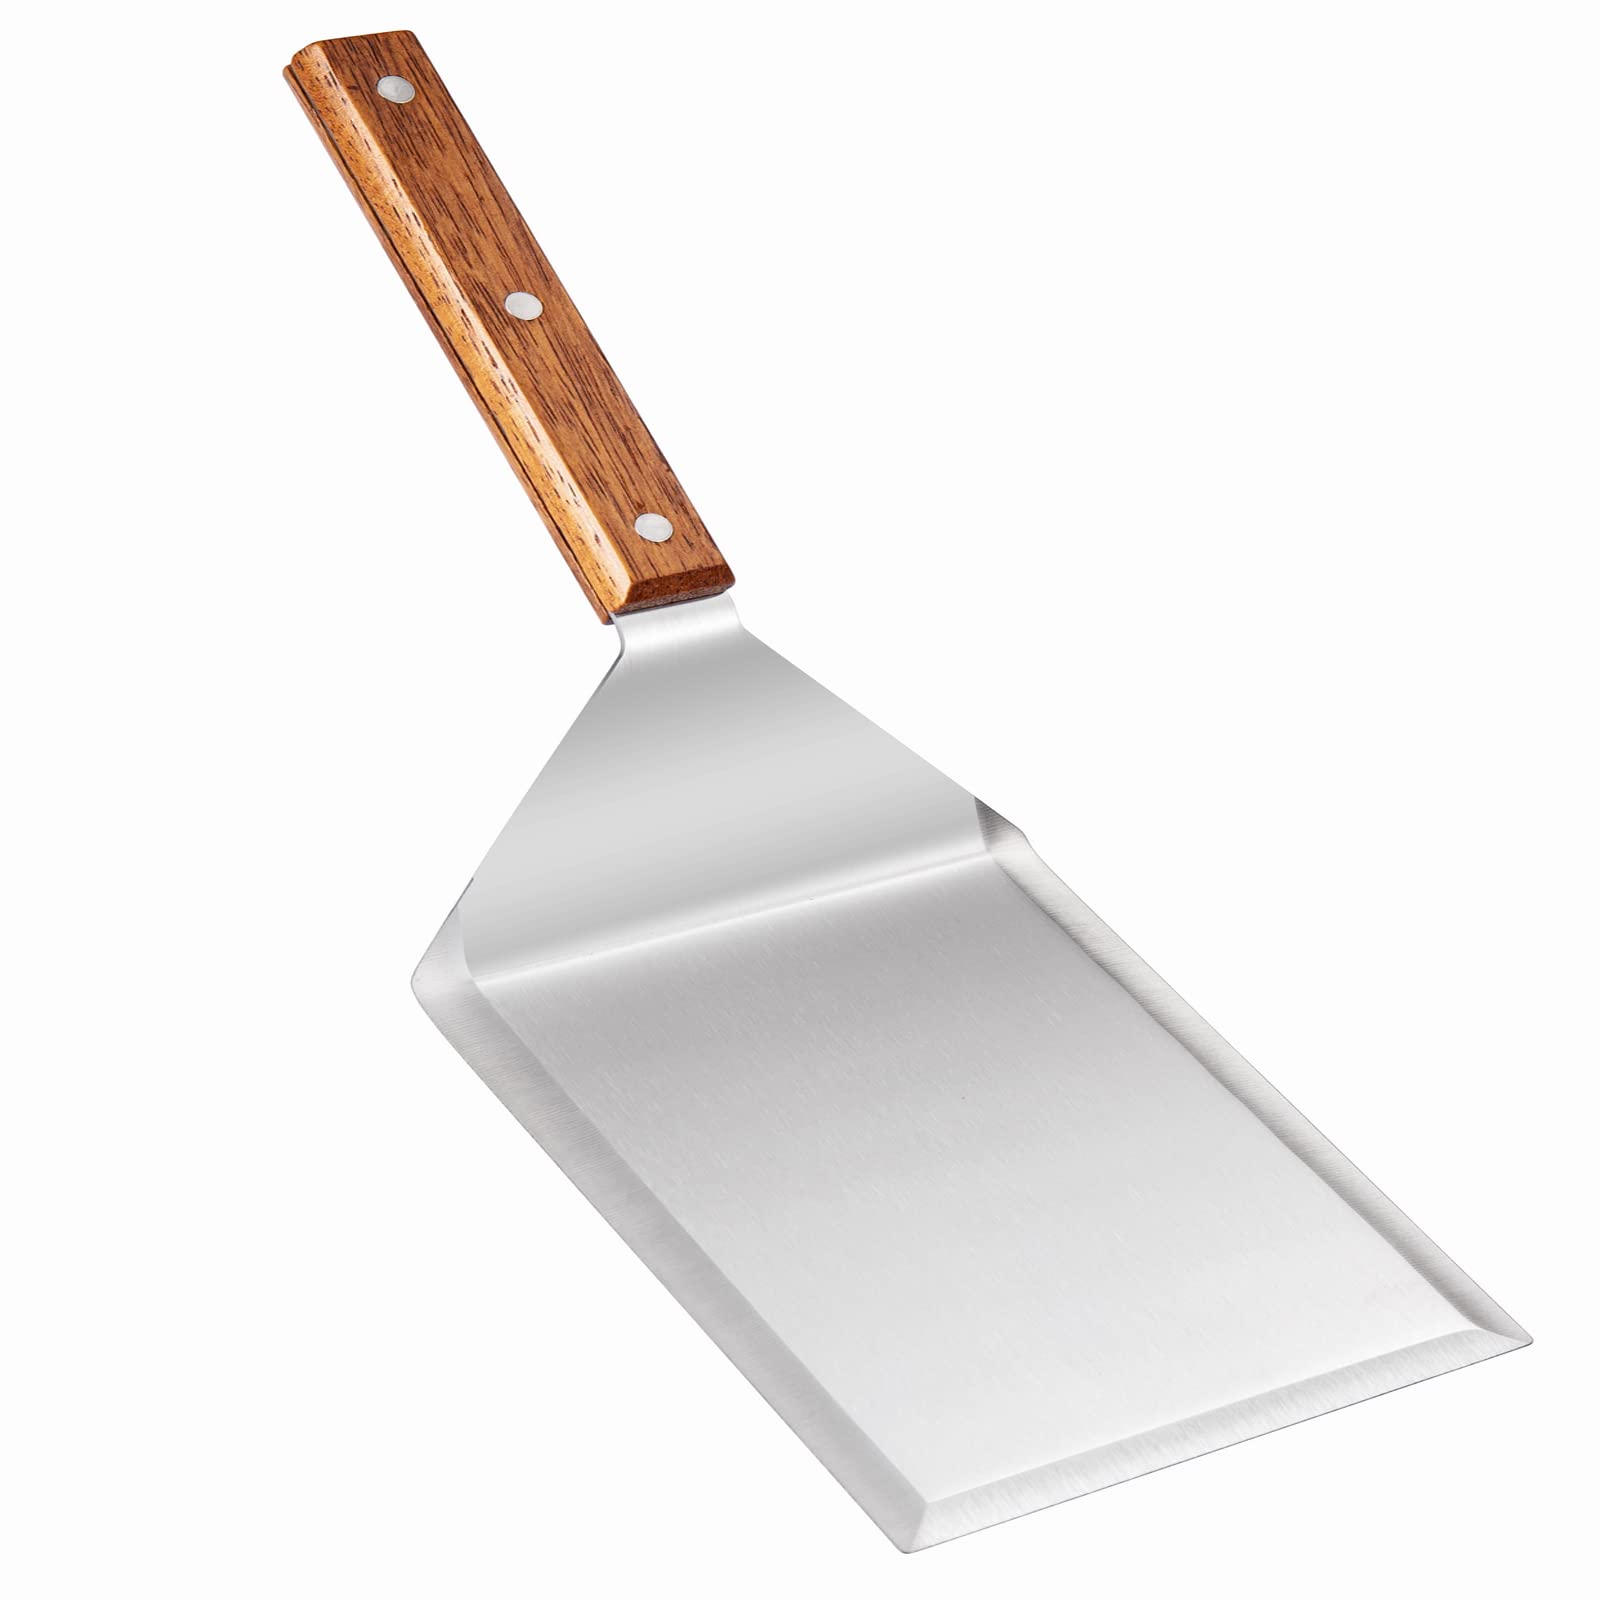 Homi Styles Extra Wide Spatula with Beveled Edges